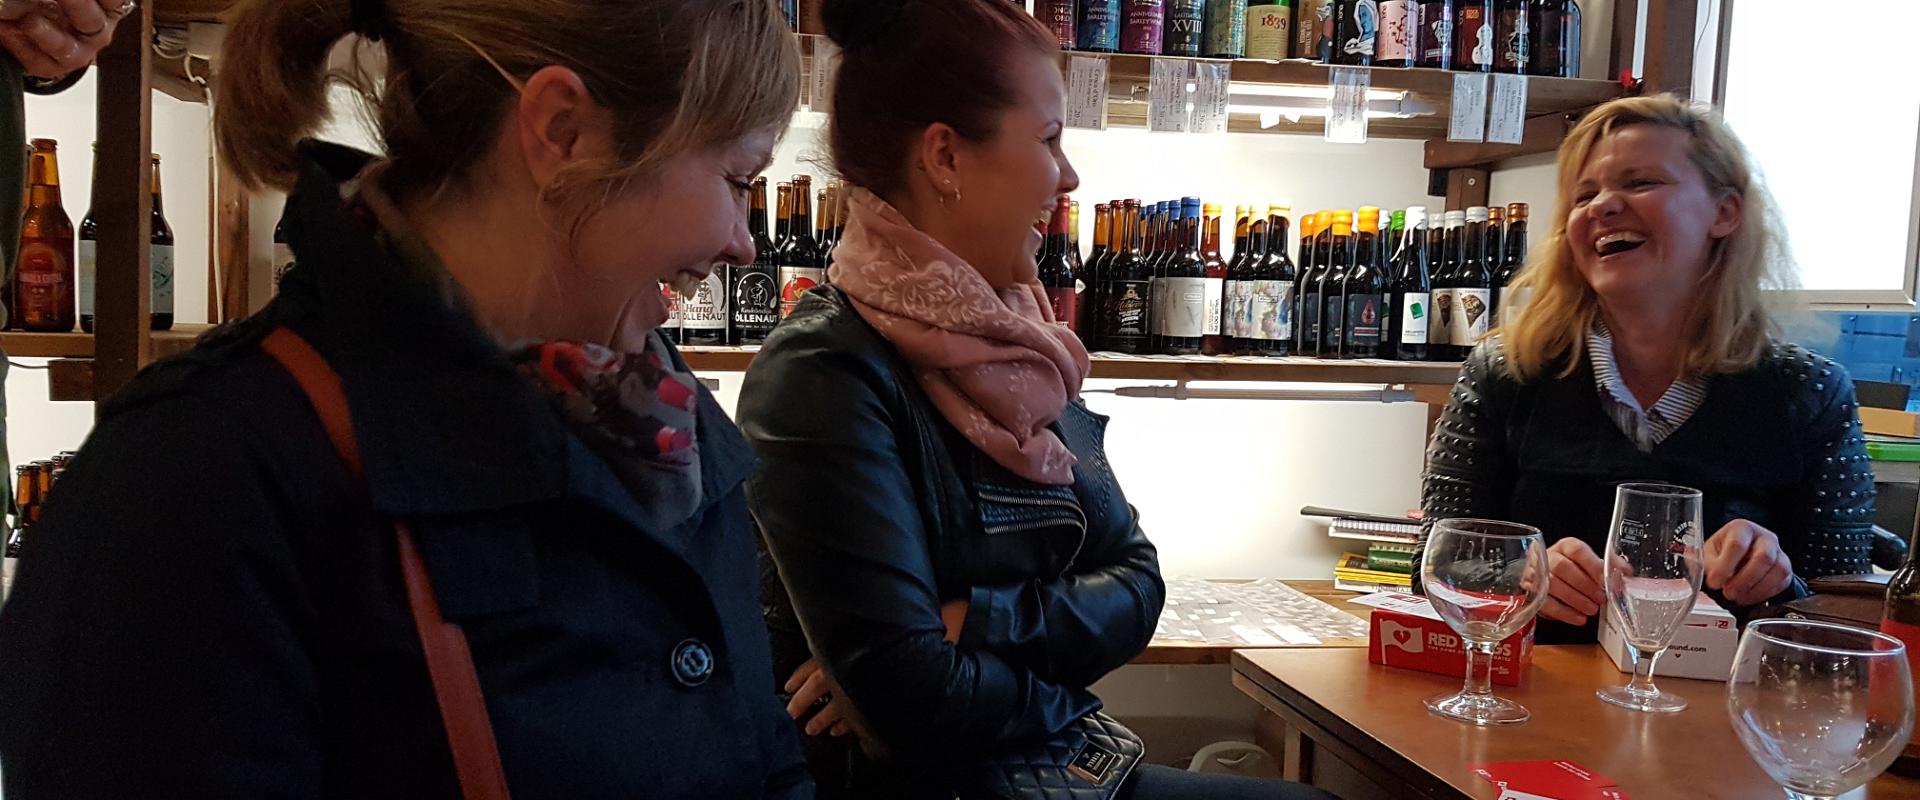 Beer-themed guided tour with tasting